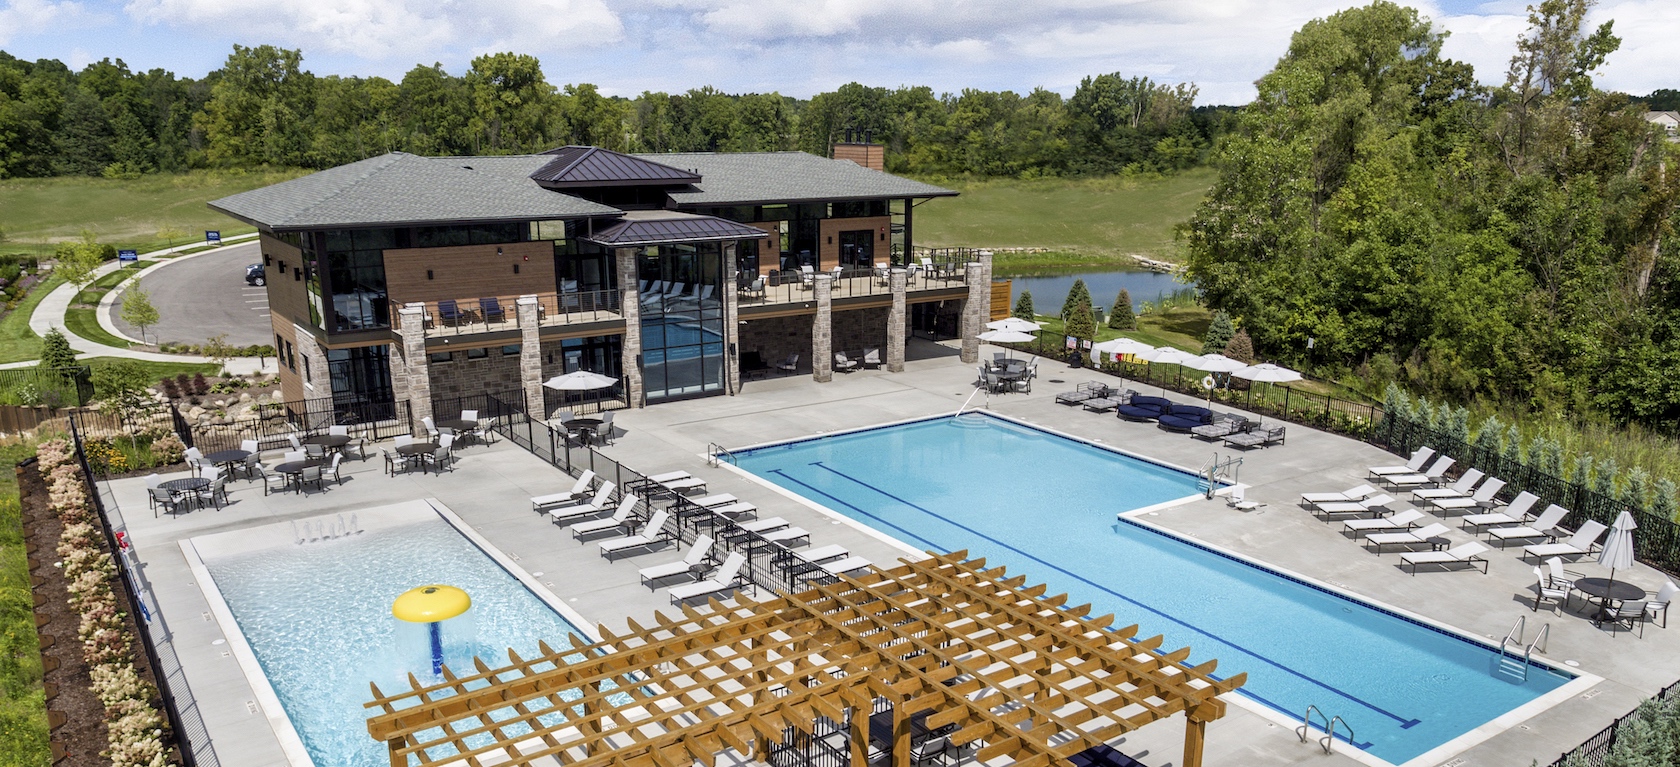 Aerial view of clubhouse and pool at North Oaks of Ann Arbor community.